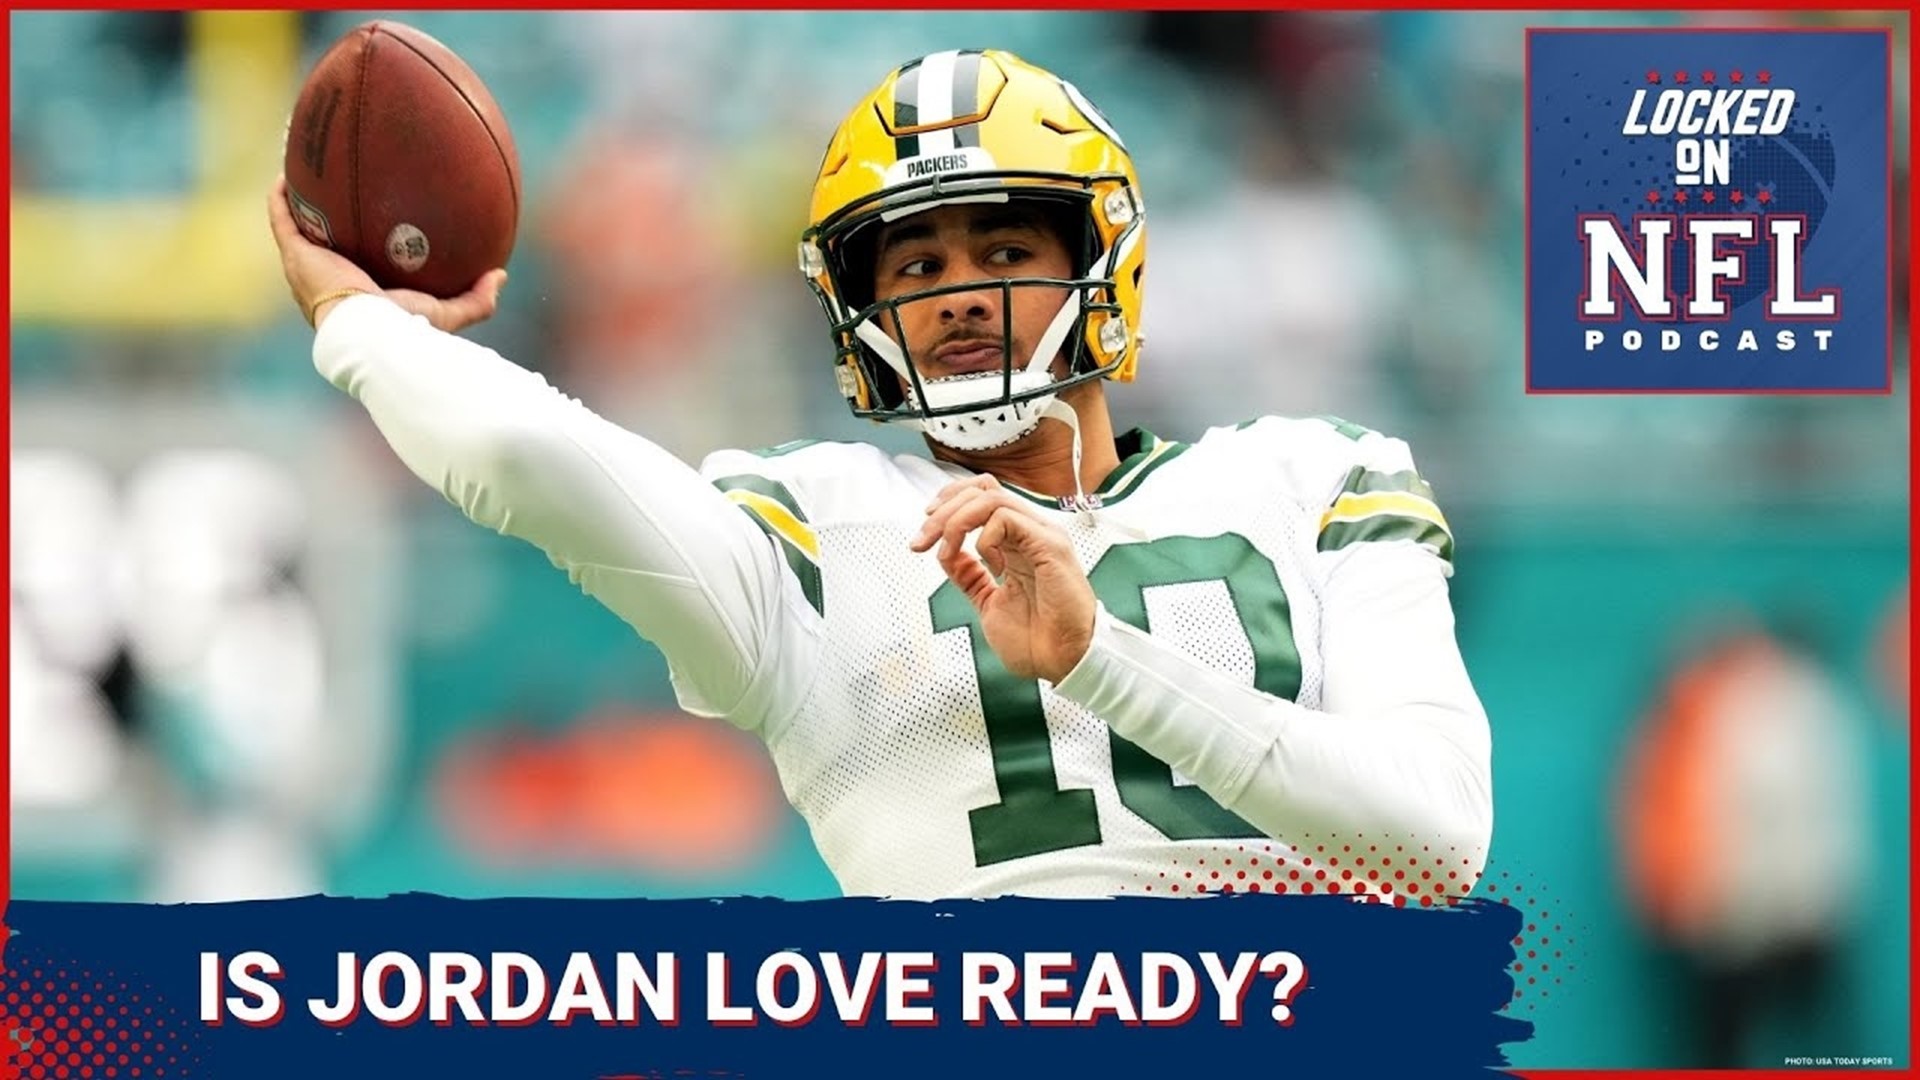 We discuss if Jordan Love is ready to take over the Green Bay Packers and what to make of the New Orleans Saints' first and second-year players